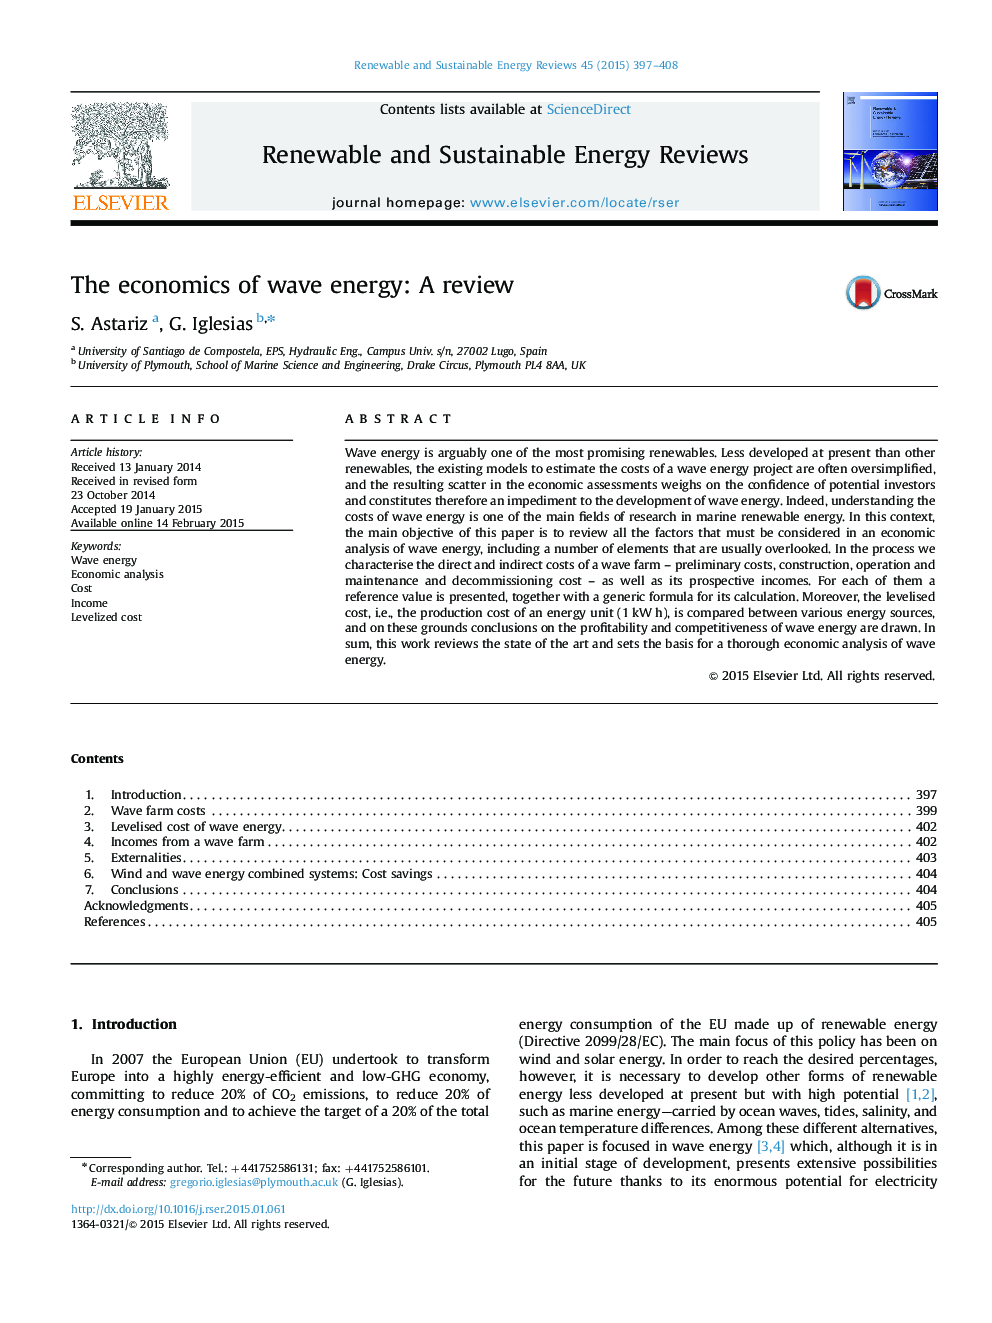 The economics of wave energy: A review